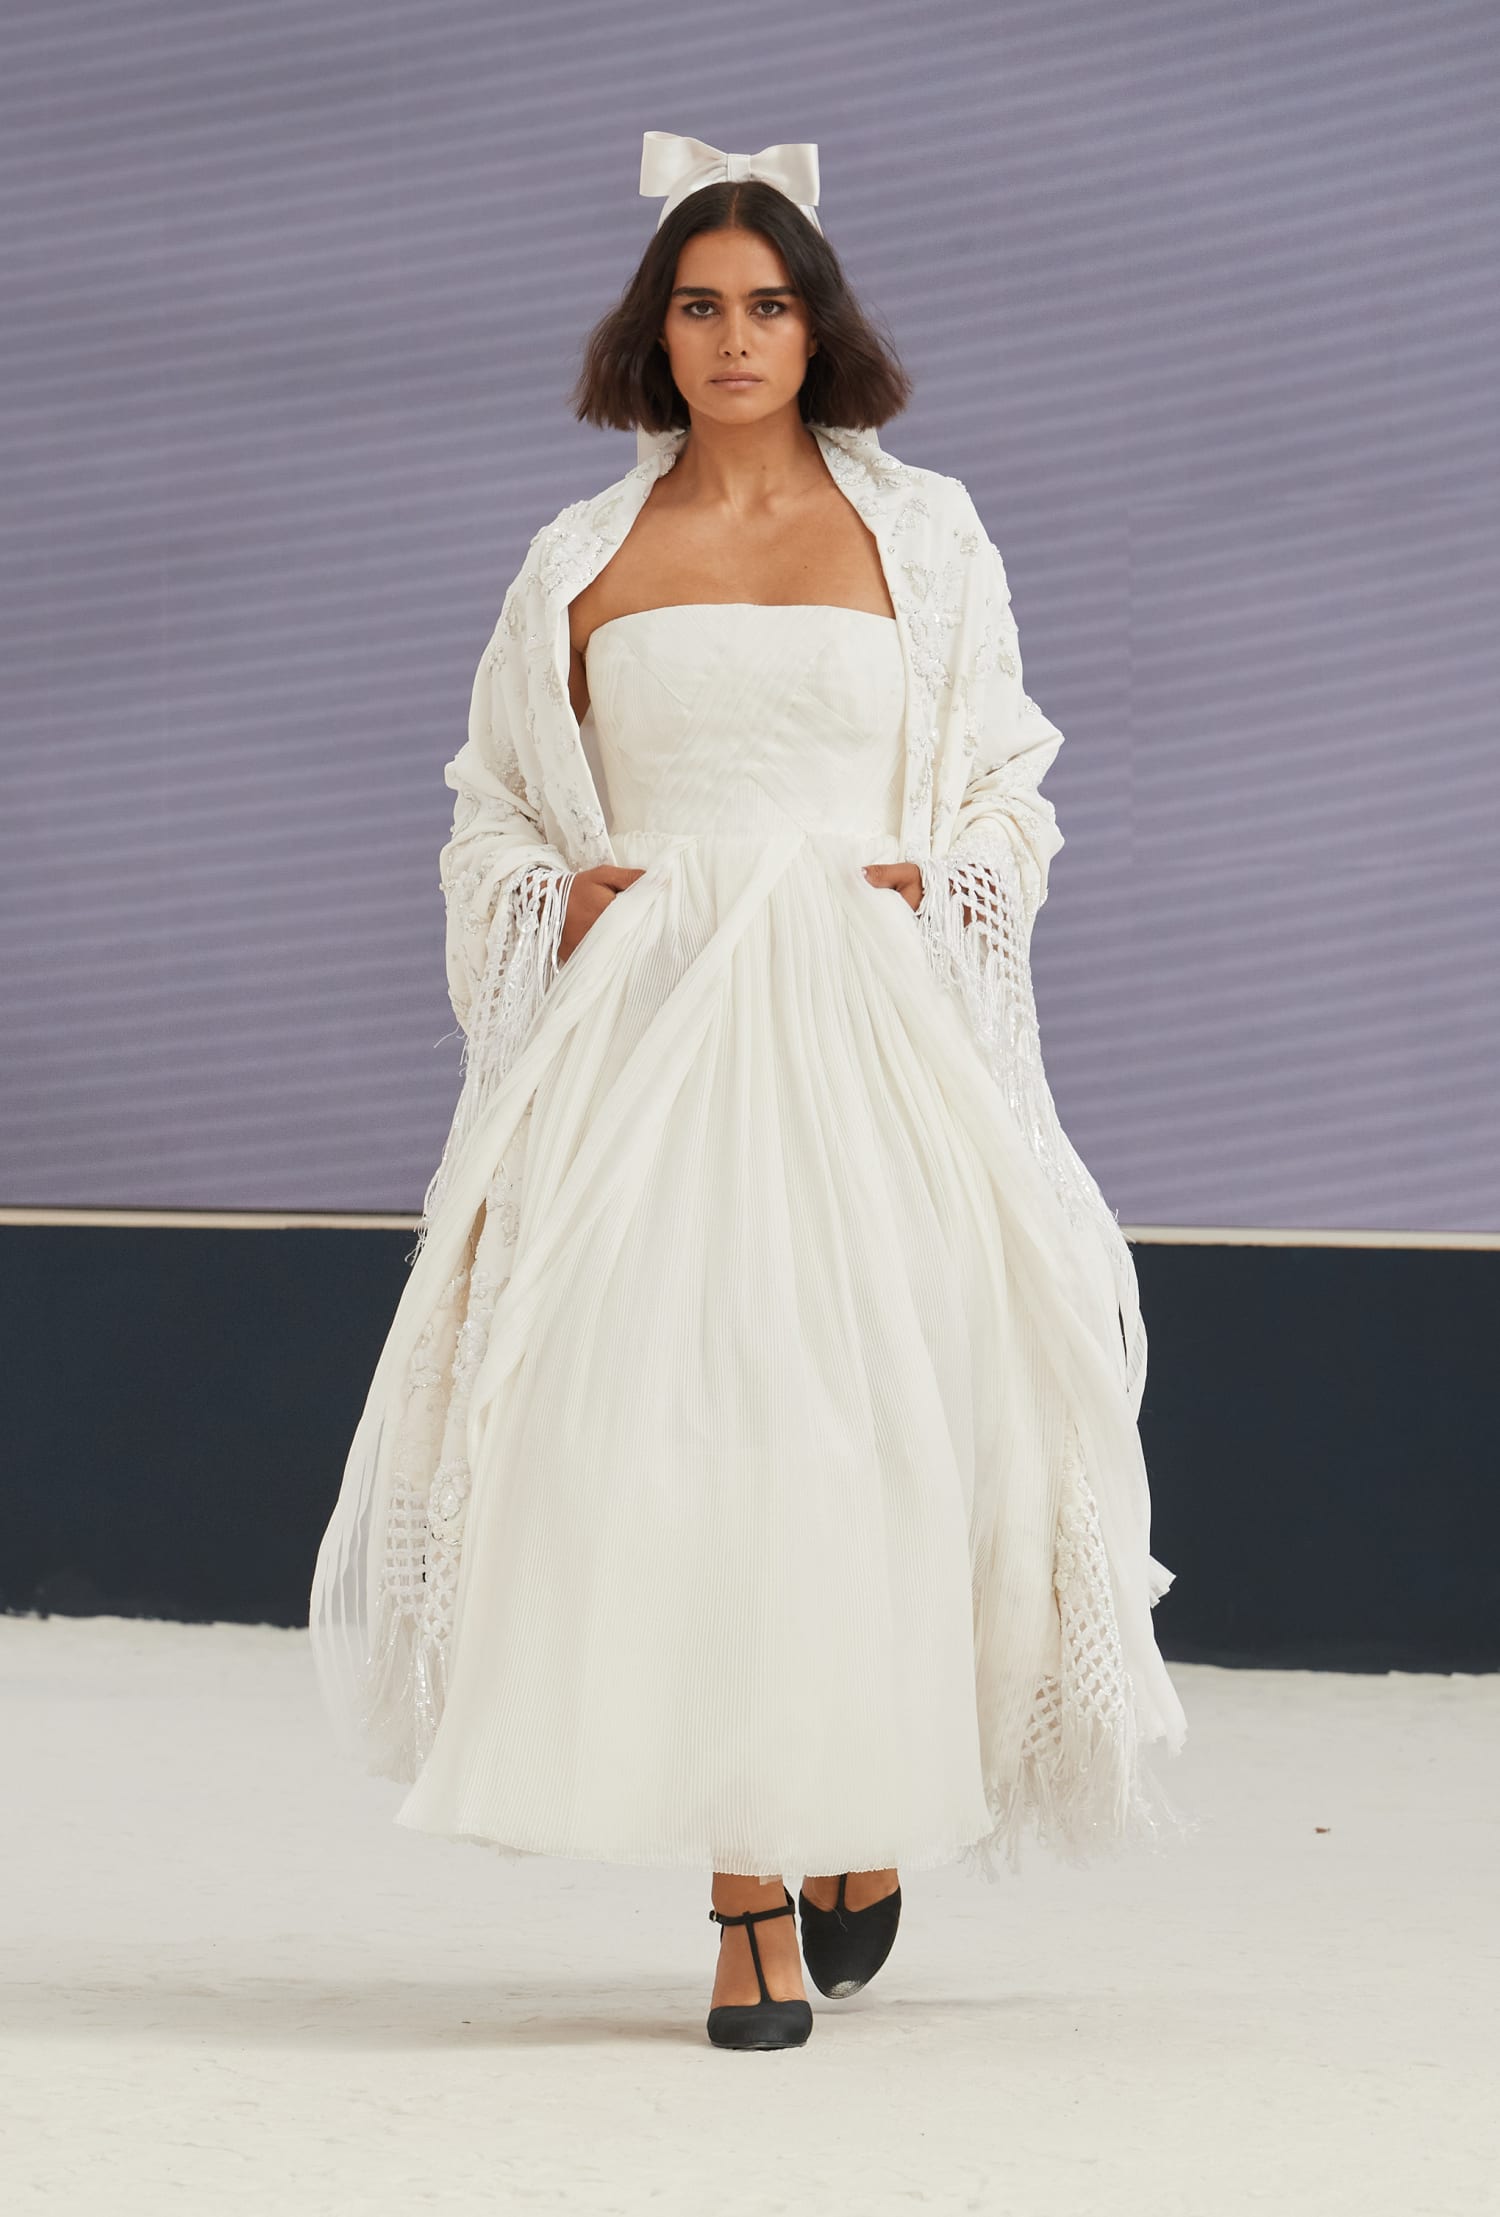 Chanel Imagines Its Couture Show as a Bucolic Bridal Procession